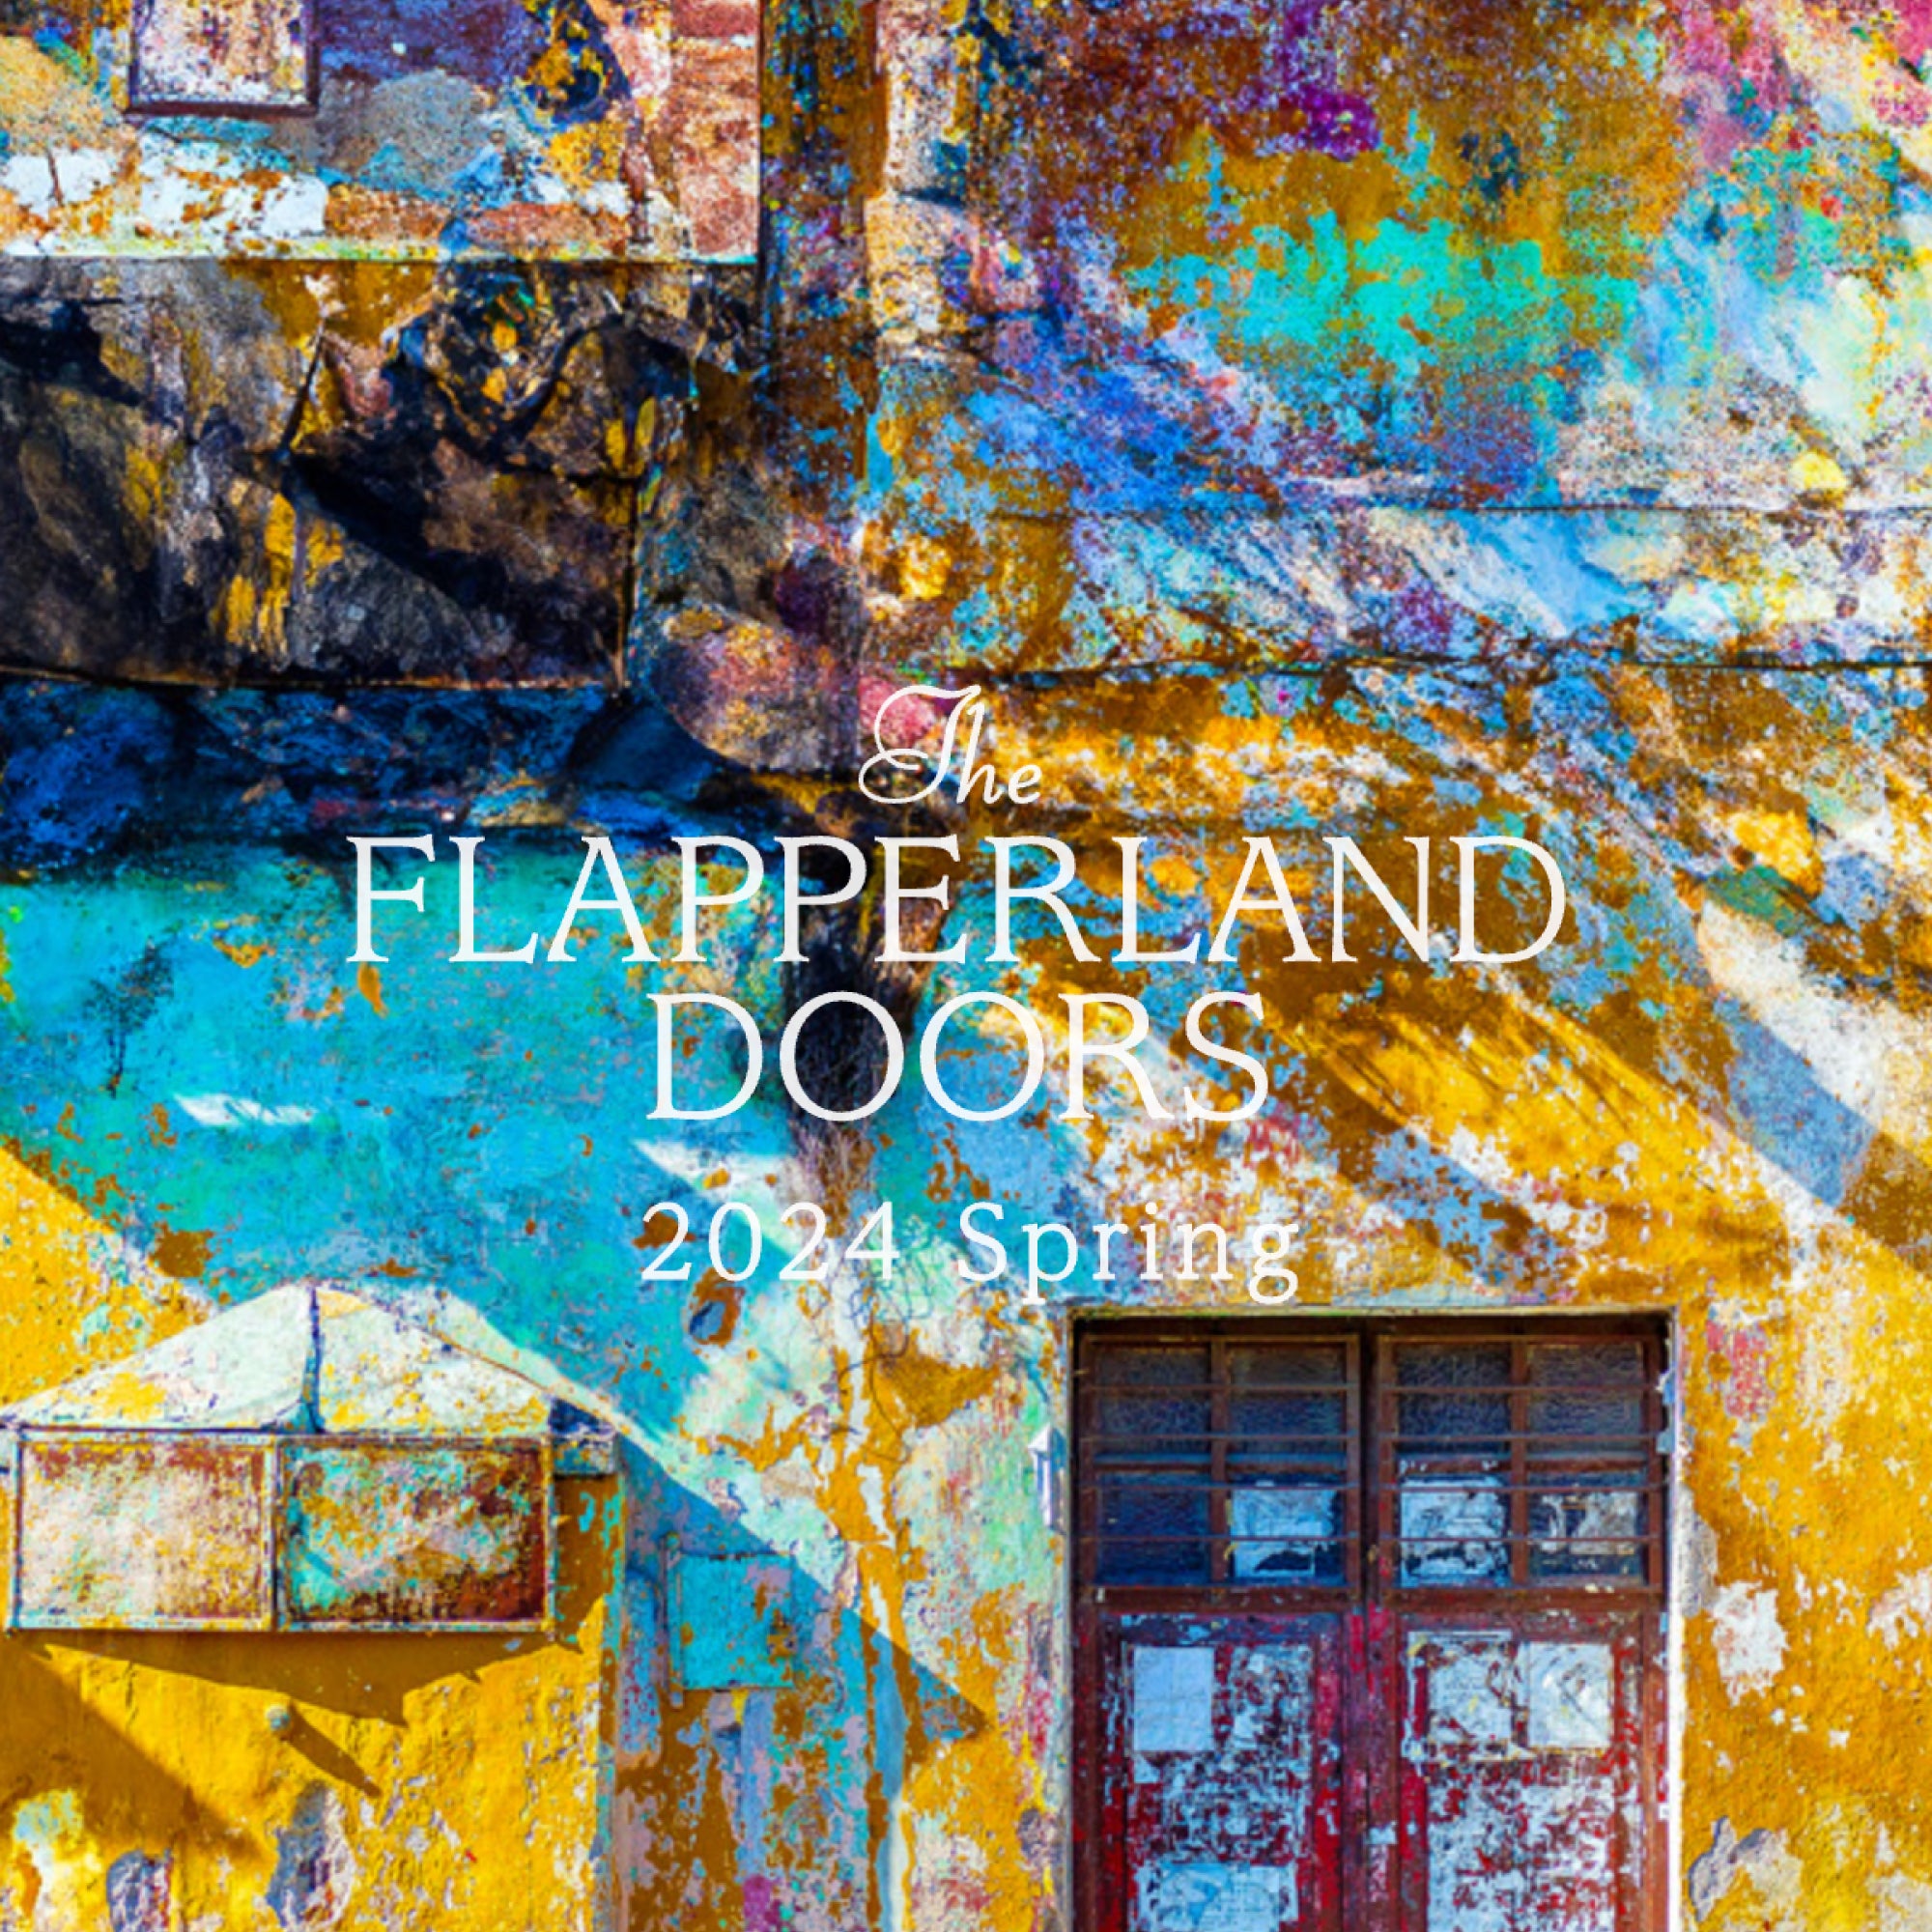 THE FLAPPERLAND DOORS にて、Leave No Trace ワークショップを開催！